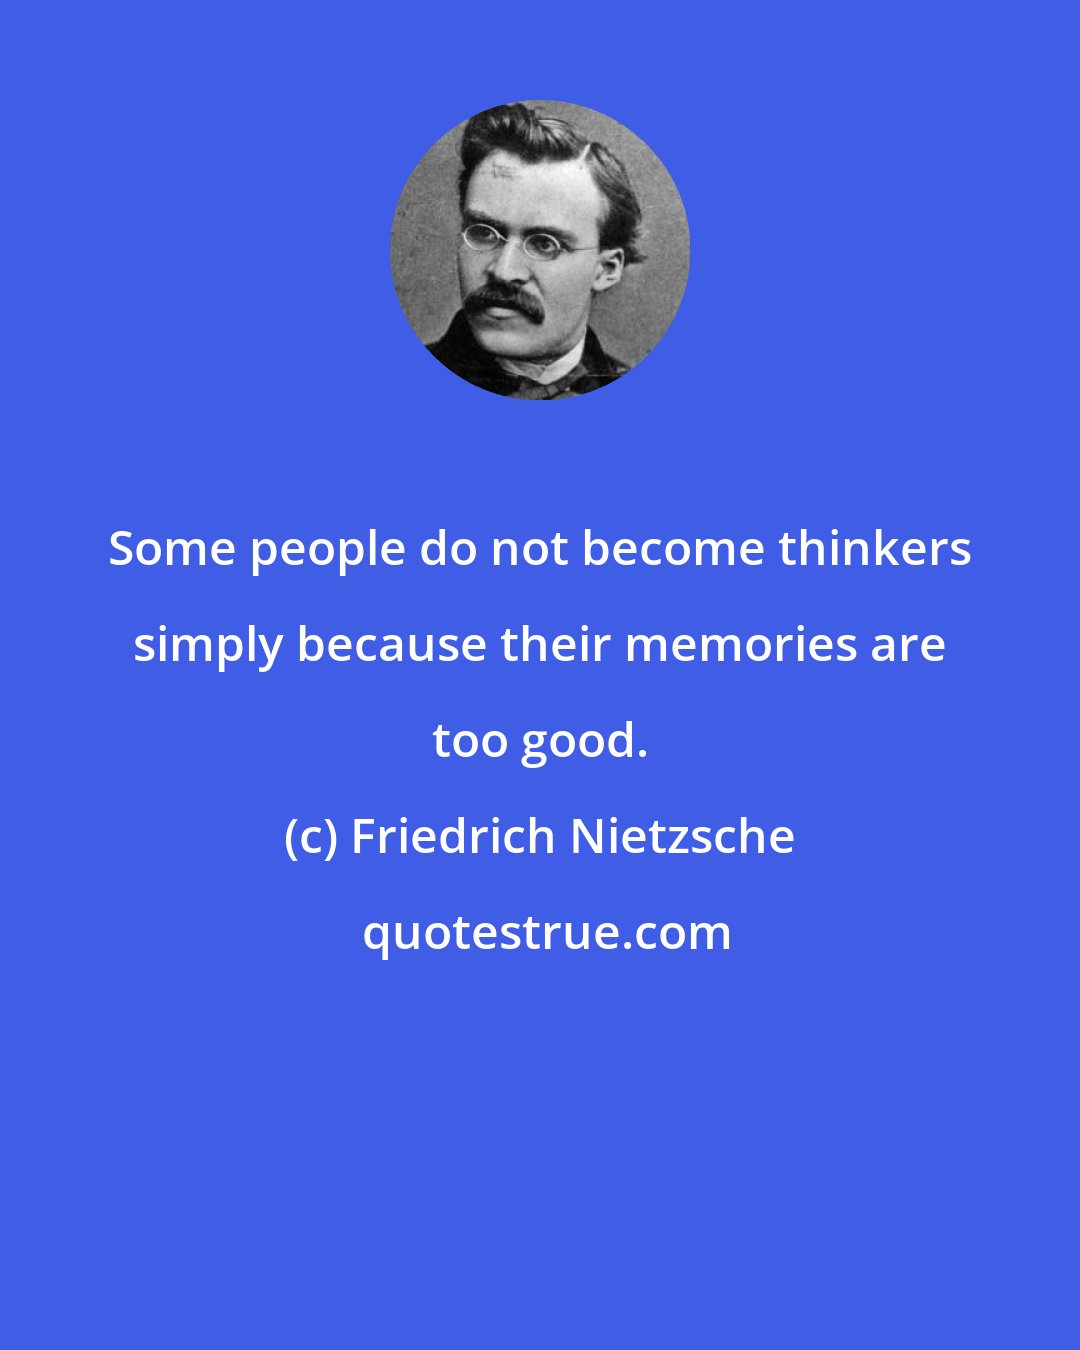 Friedrich Nietzsche: Some people do not become thinkers simply because their memories are too good.